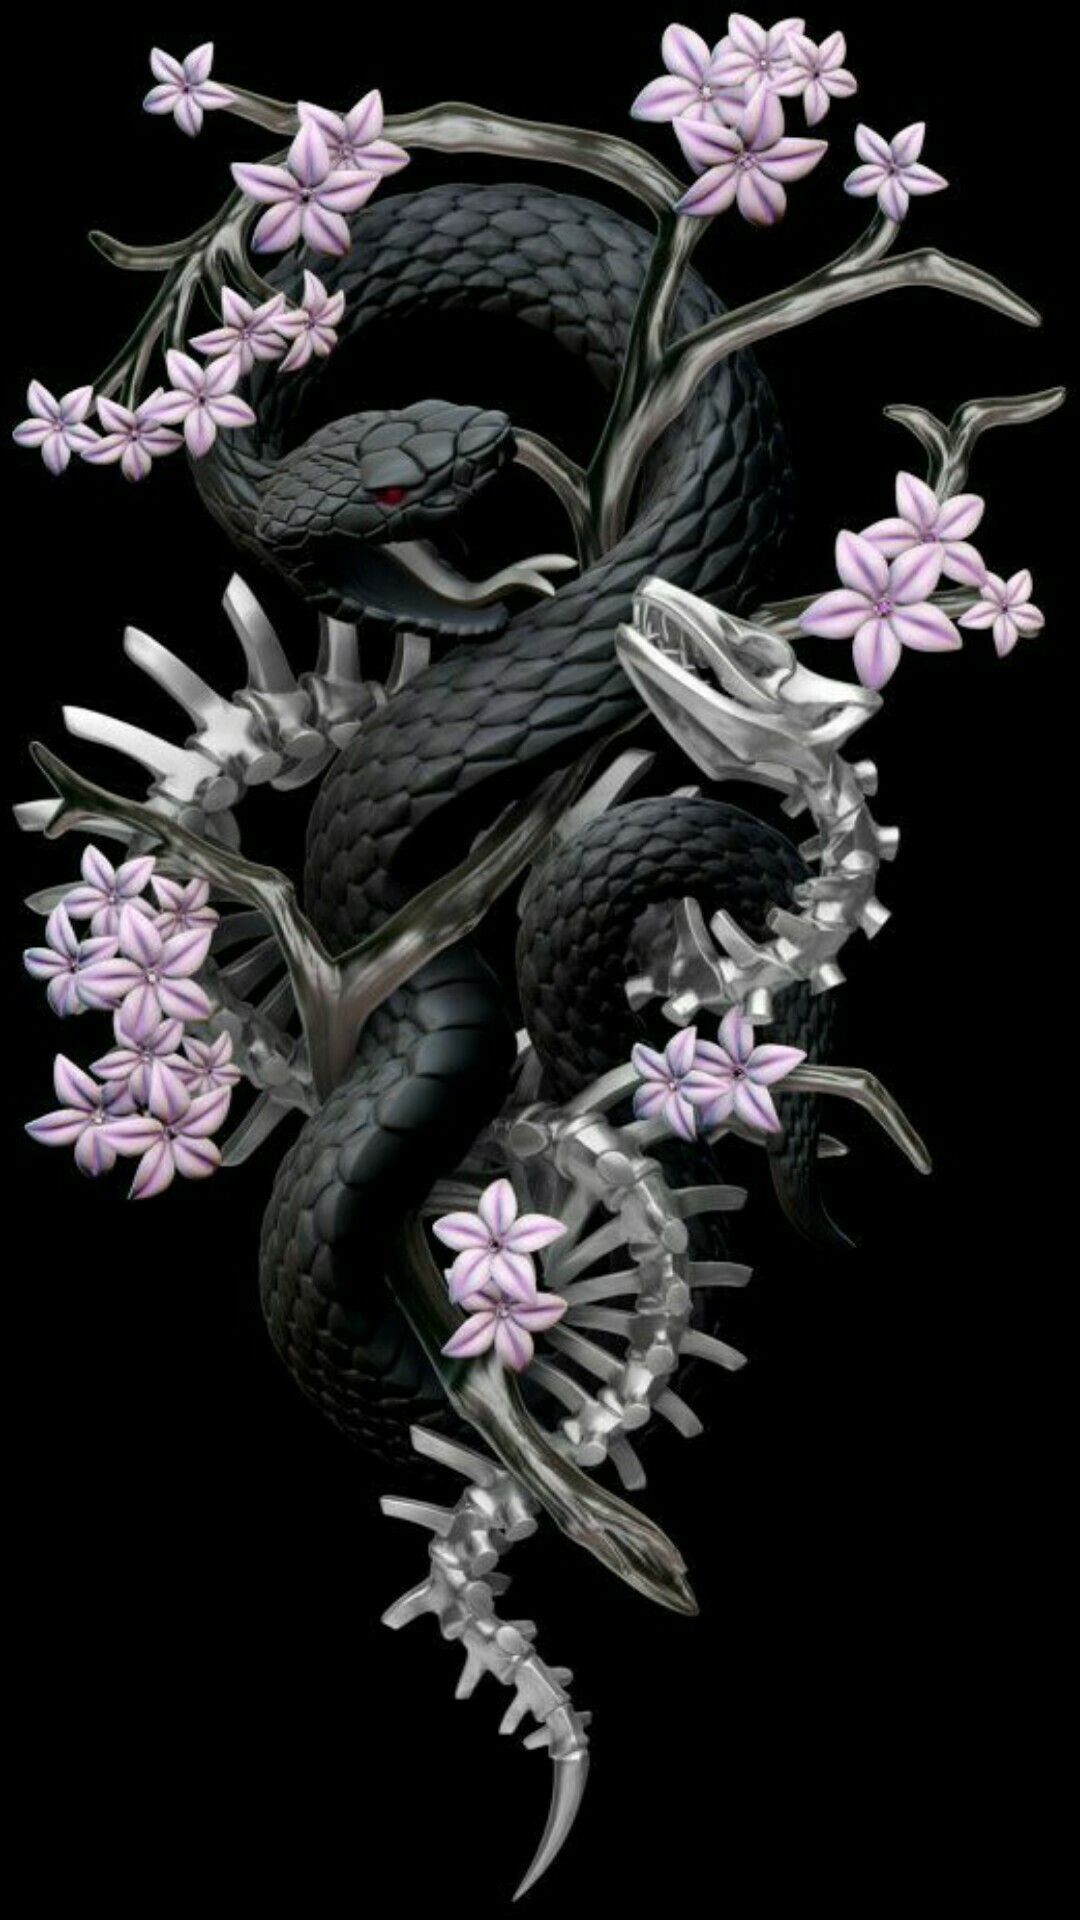 A snake with flowers and leaves on it - Snake